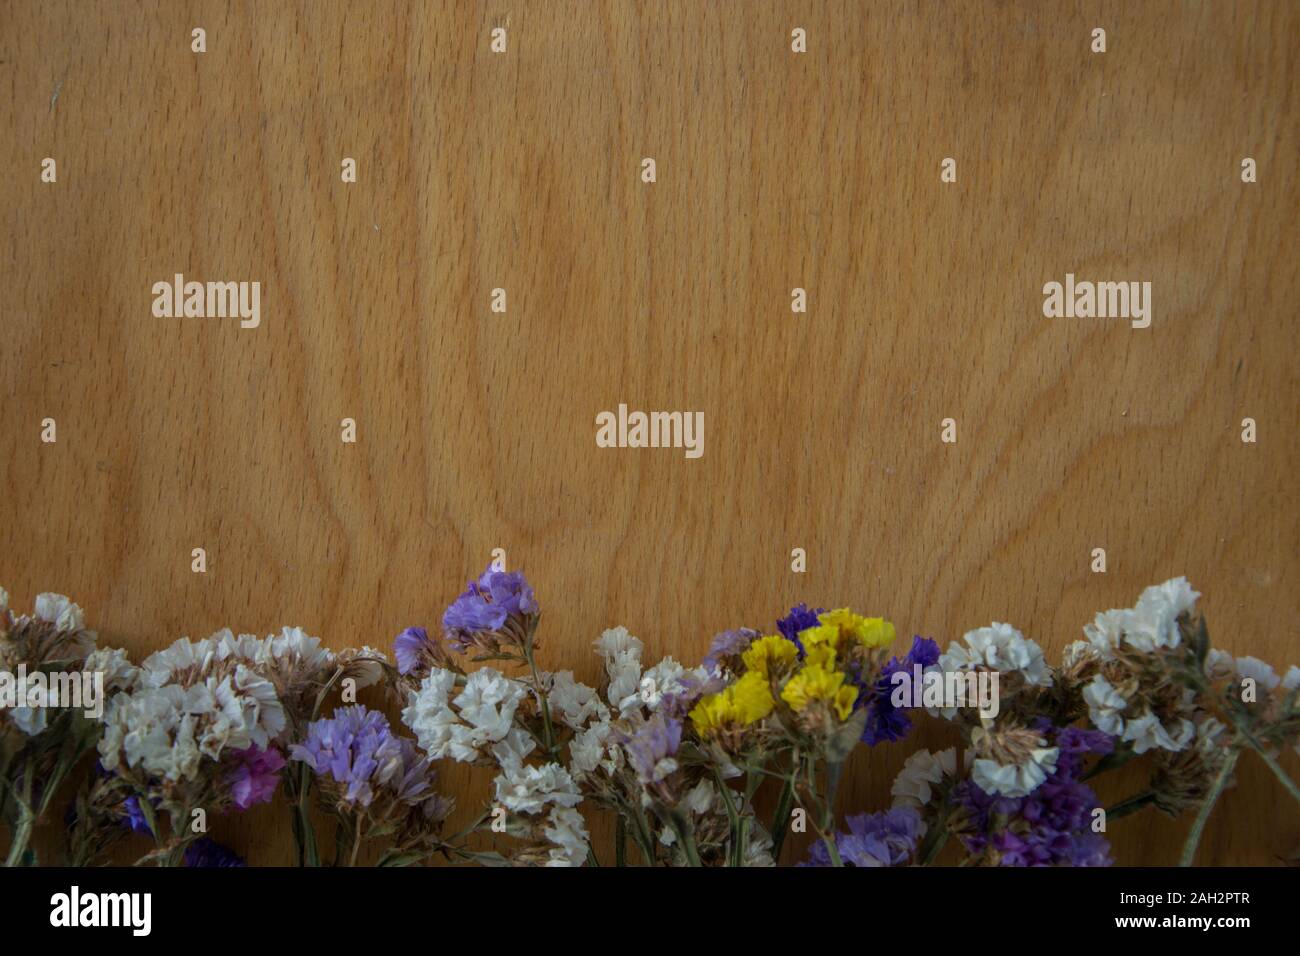 Multicolored dried flowers on wooden background, colorful limonium statice plant with copy space, place for text Stock Photo